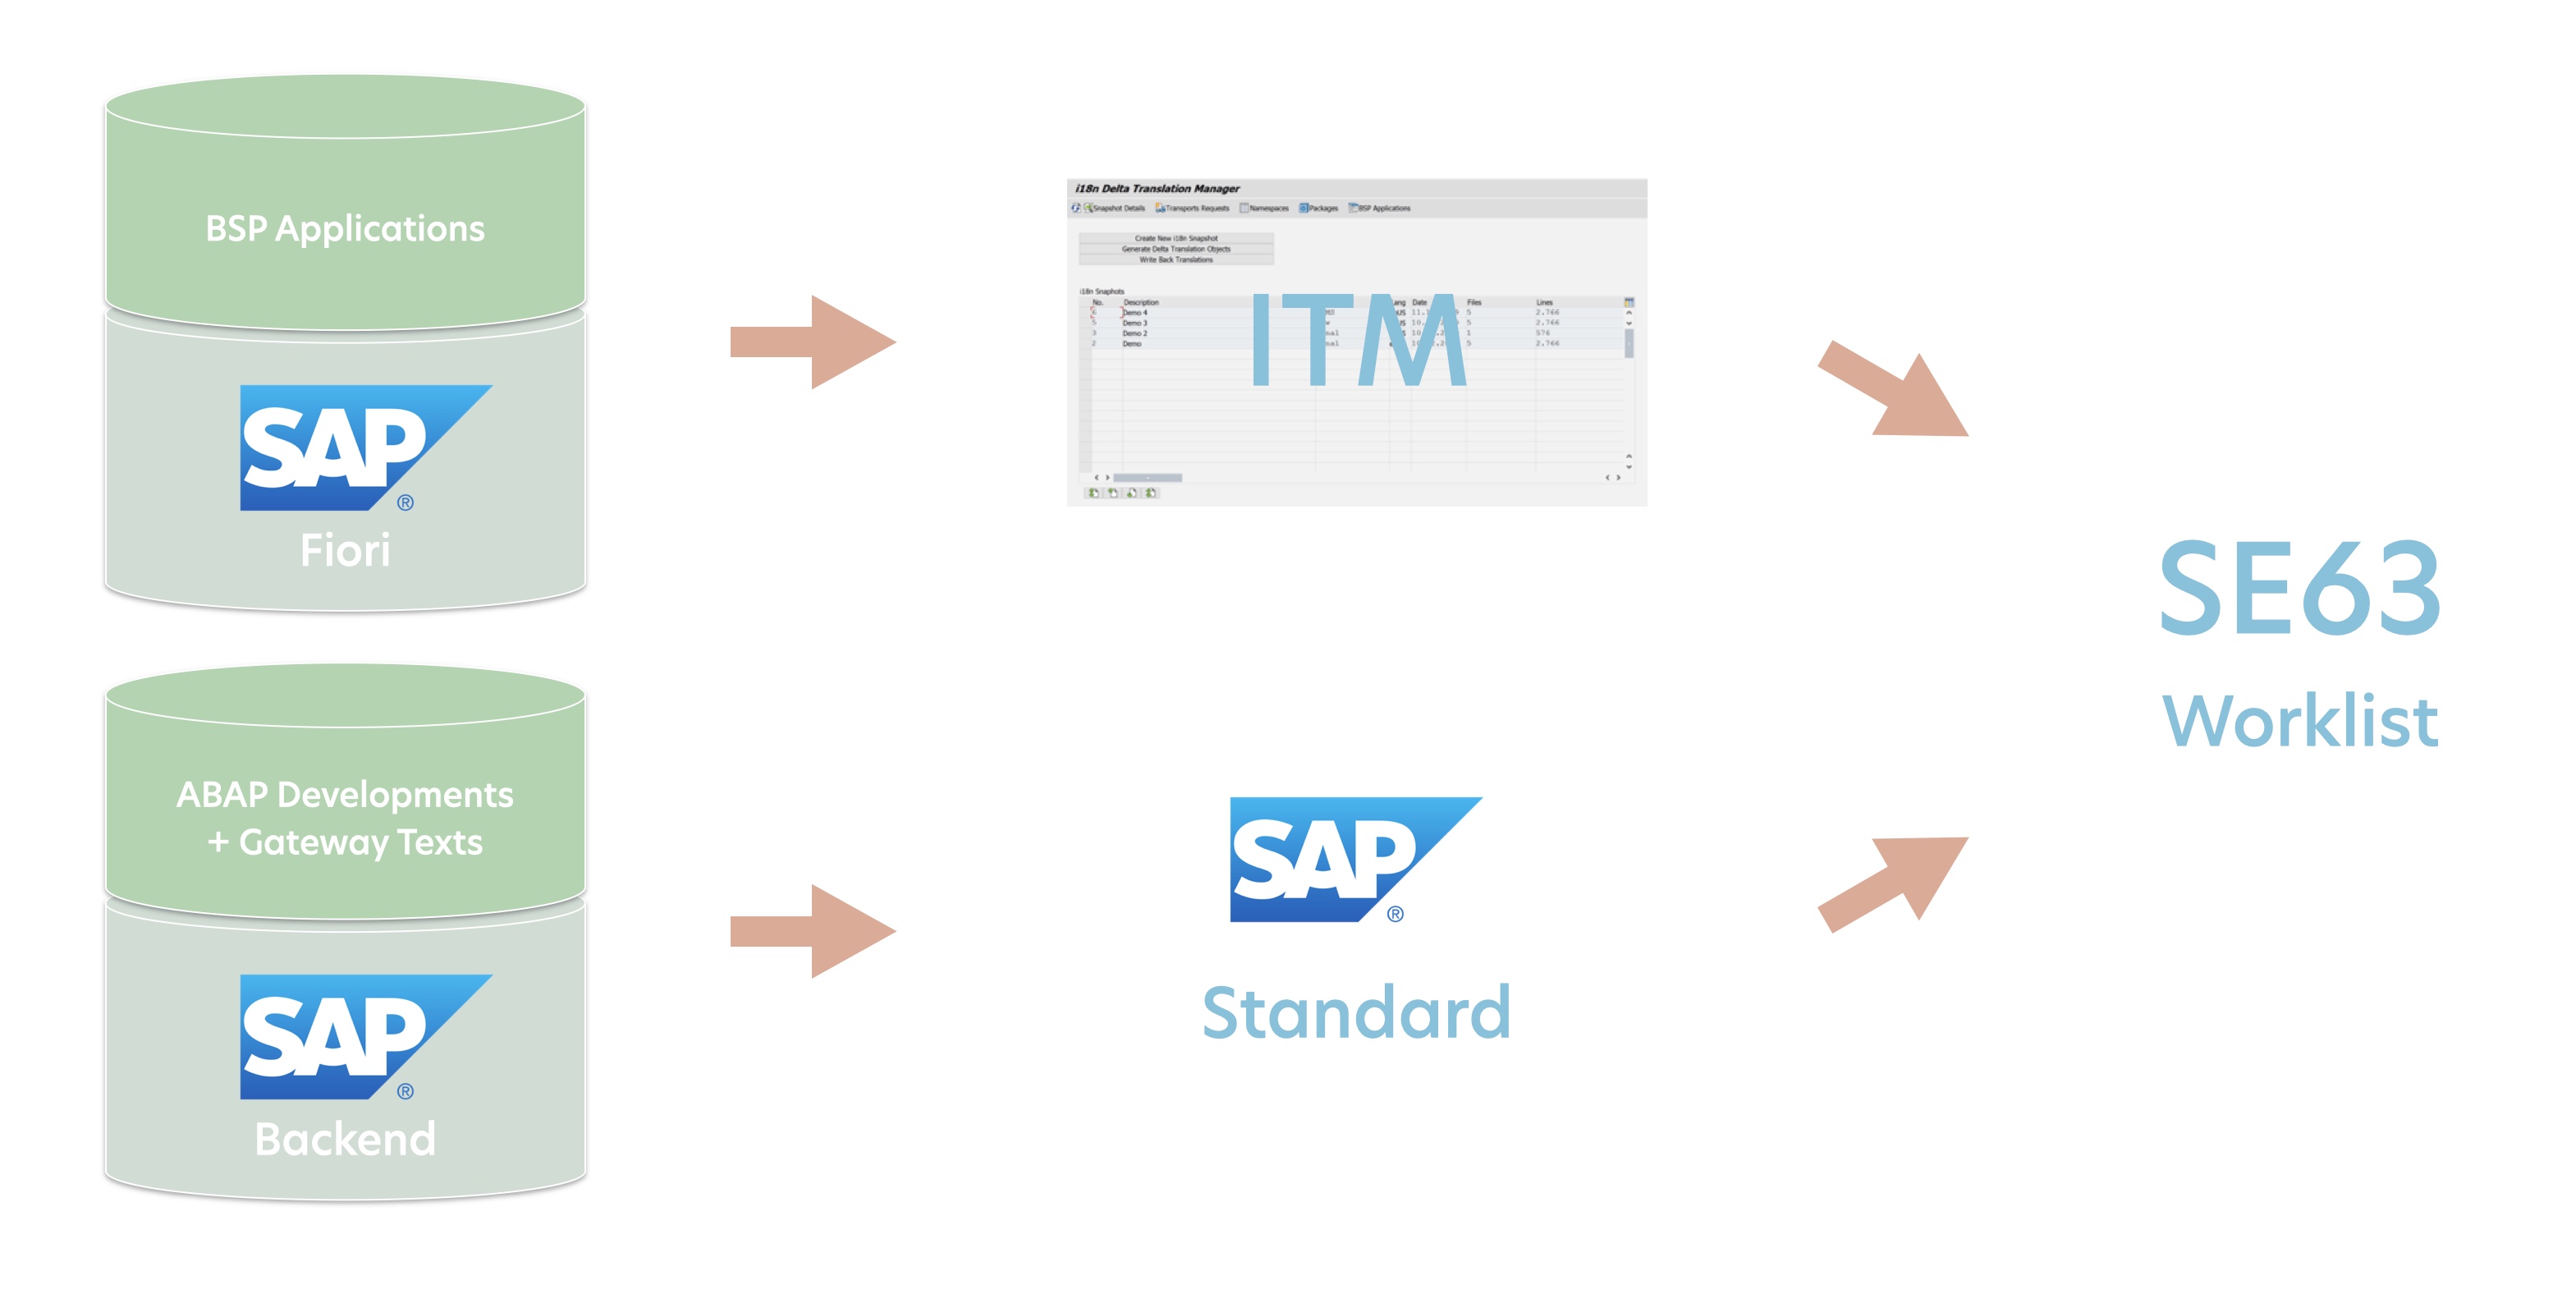 With i18n Translation Manager, you can translate Fiori apps in SE63.